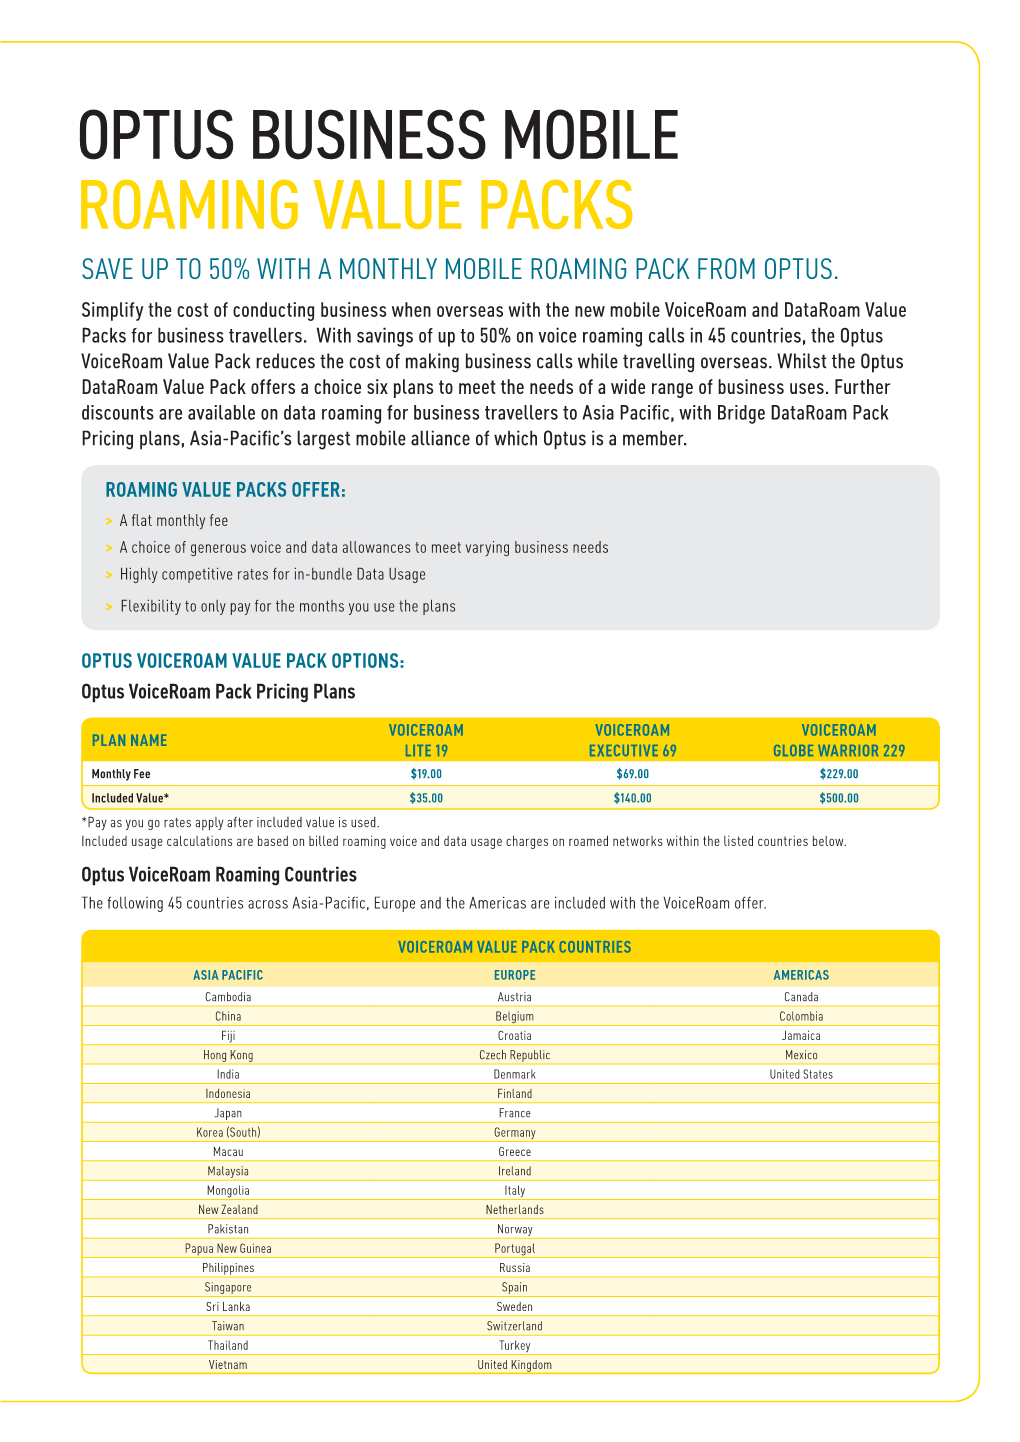 Optus Business Mobile Roaming Value Packs Save up to 50% with a Monthly Mobile Roaming Pack from Optus